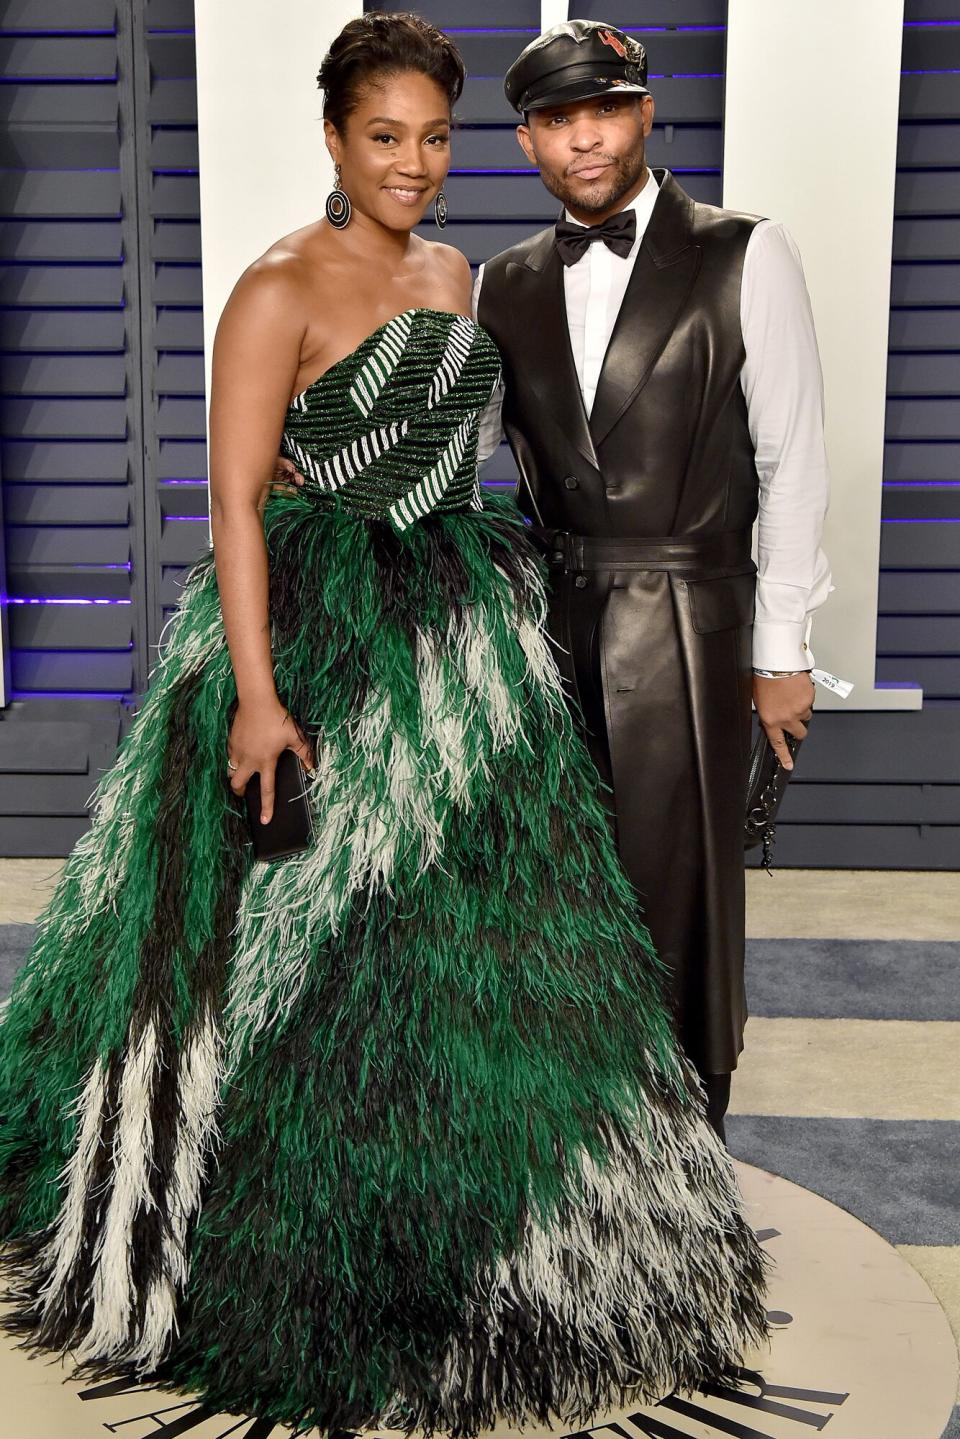 Tiffany Haddish (L) and Law Roach attend the 2019 Vanity Fair Oscar Party Hosted By Radhika Jones at Wallis Annenberg Center for the Performing Arts on February 24, 2019 in Beverly Hills, California.